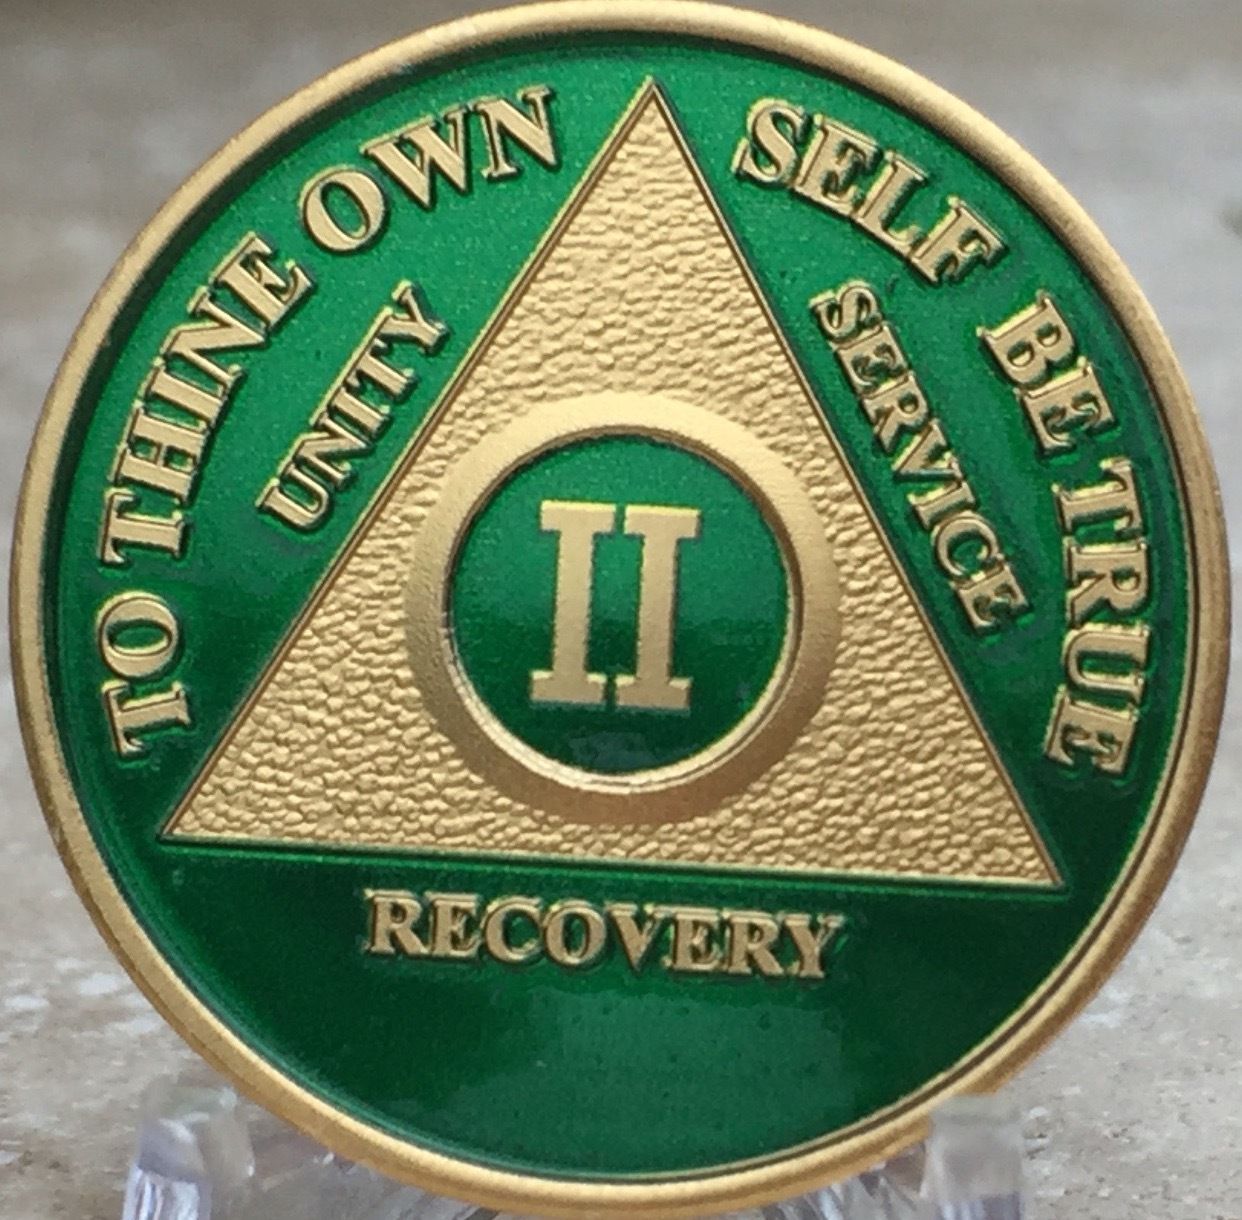 2 Year AA Medallion Green Gold Plated Alcoholics Anonymous Sobriety Chip Coin II - $20.39